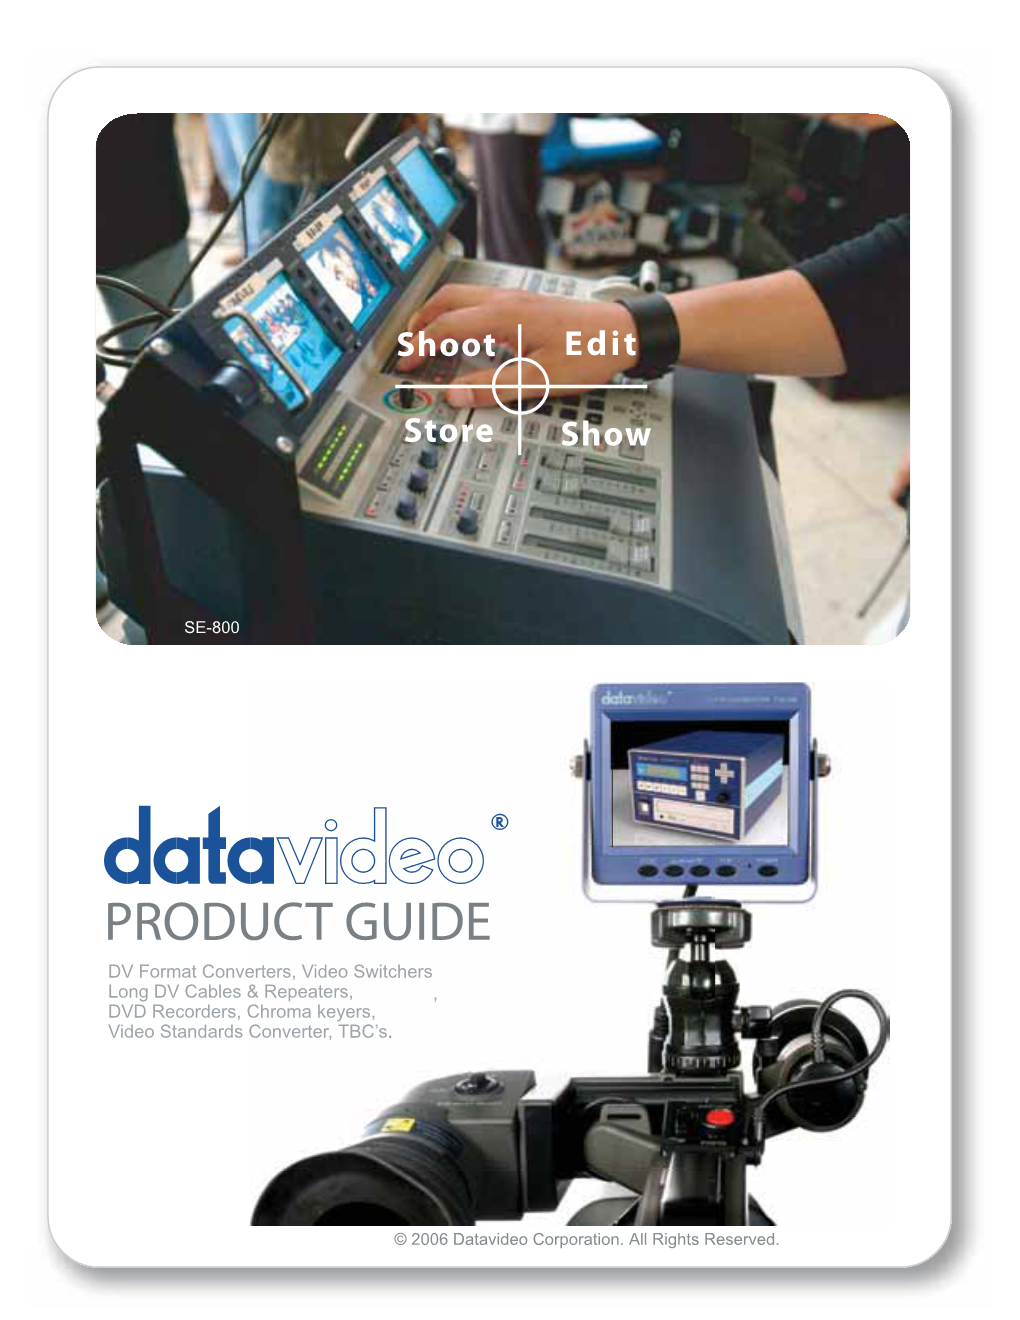 Datavideo Product Guide.Pdf